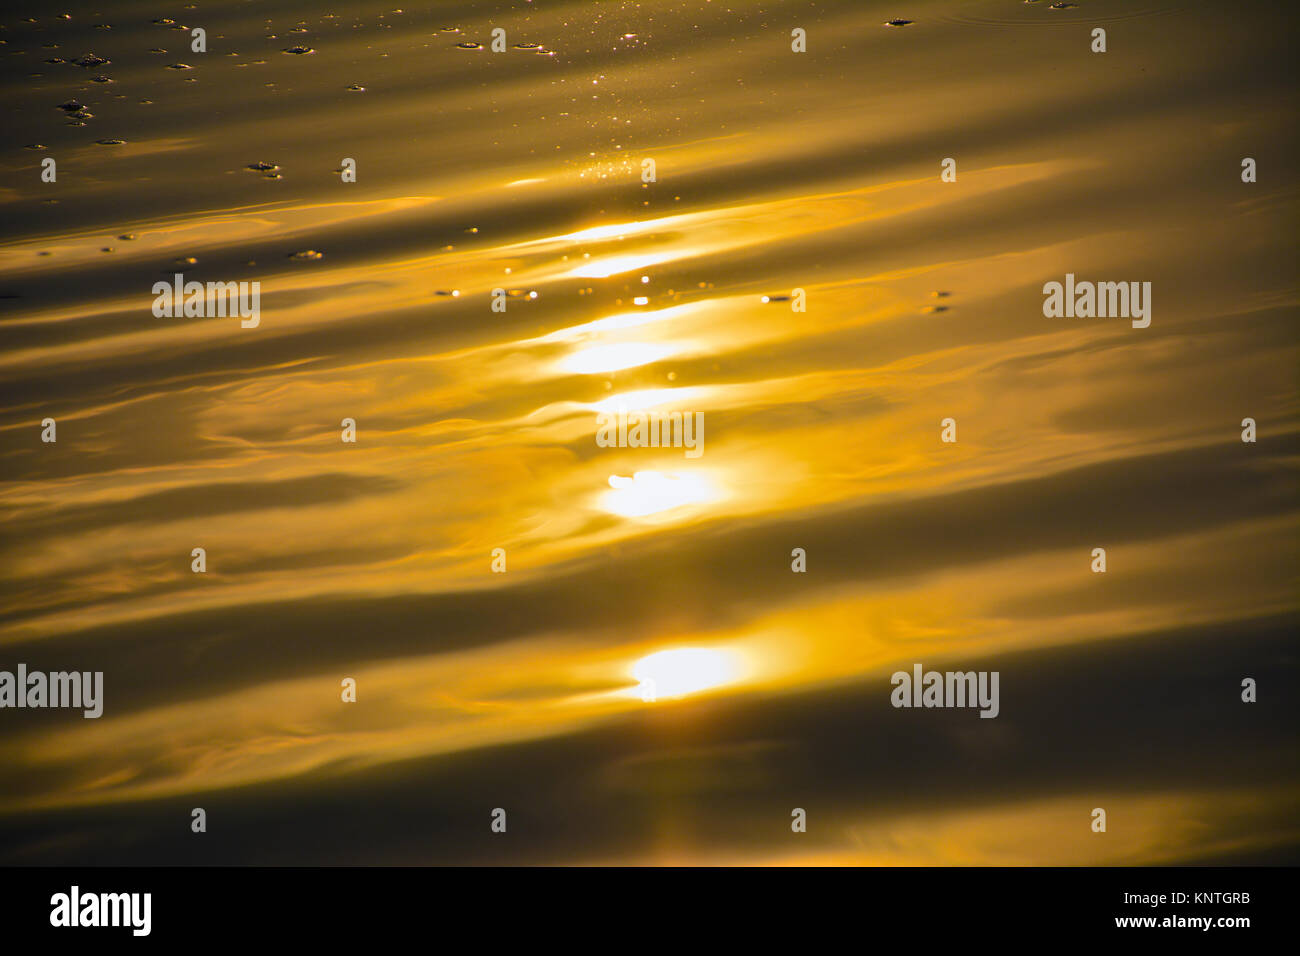 golden water wave reflection in sunset Stock Photo